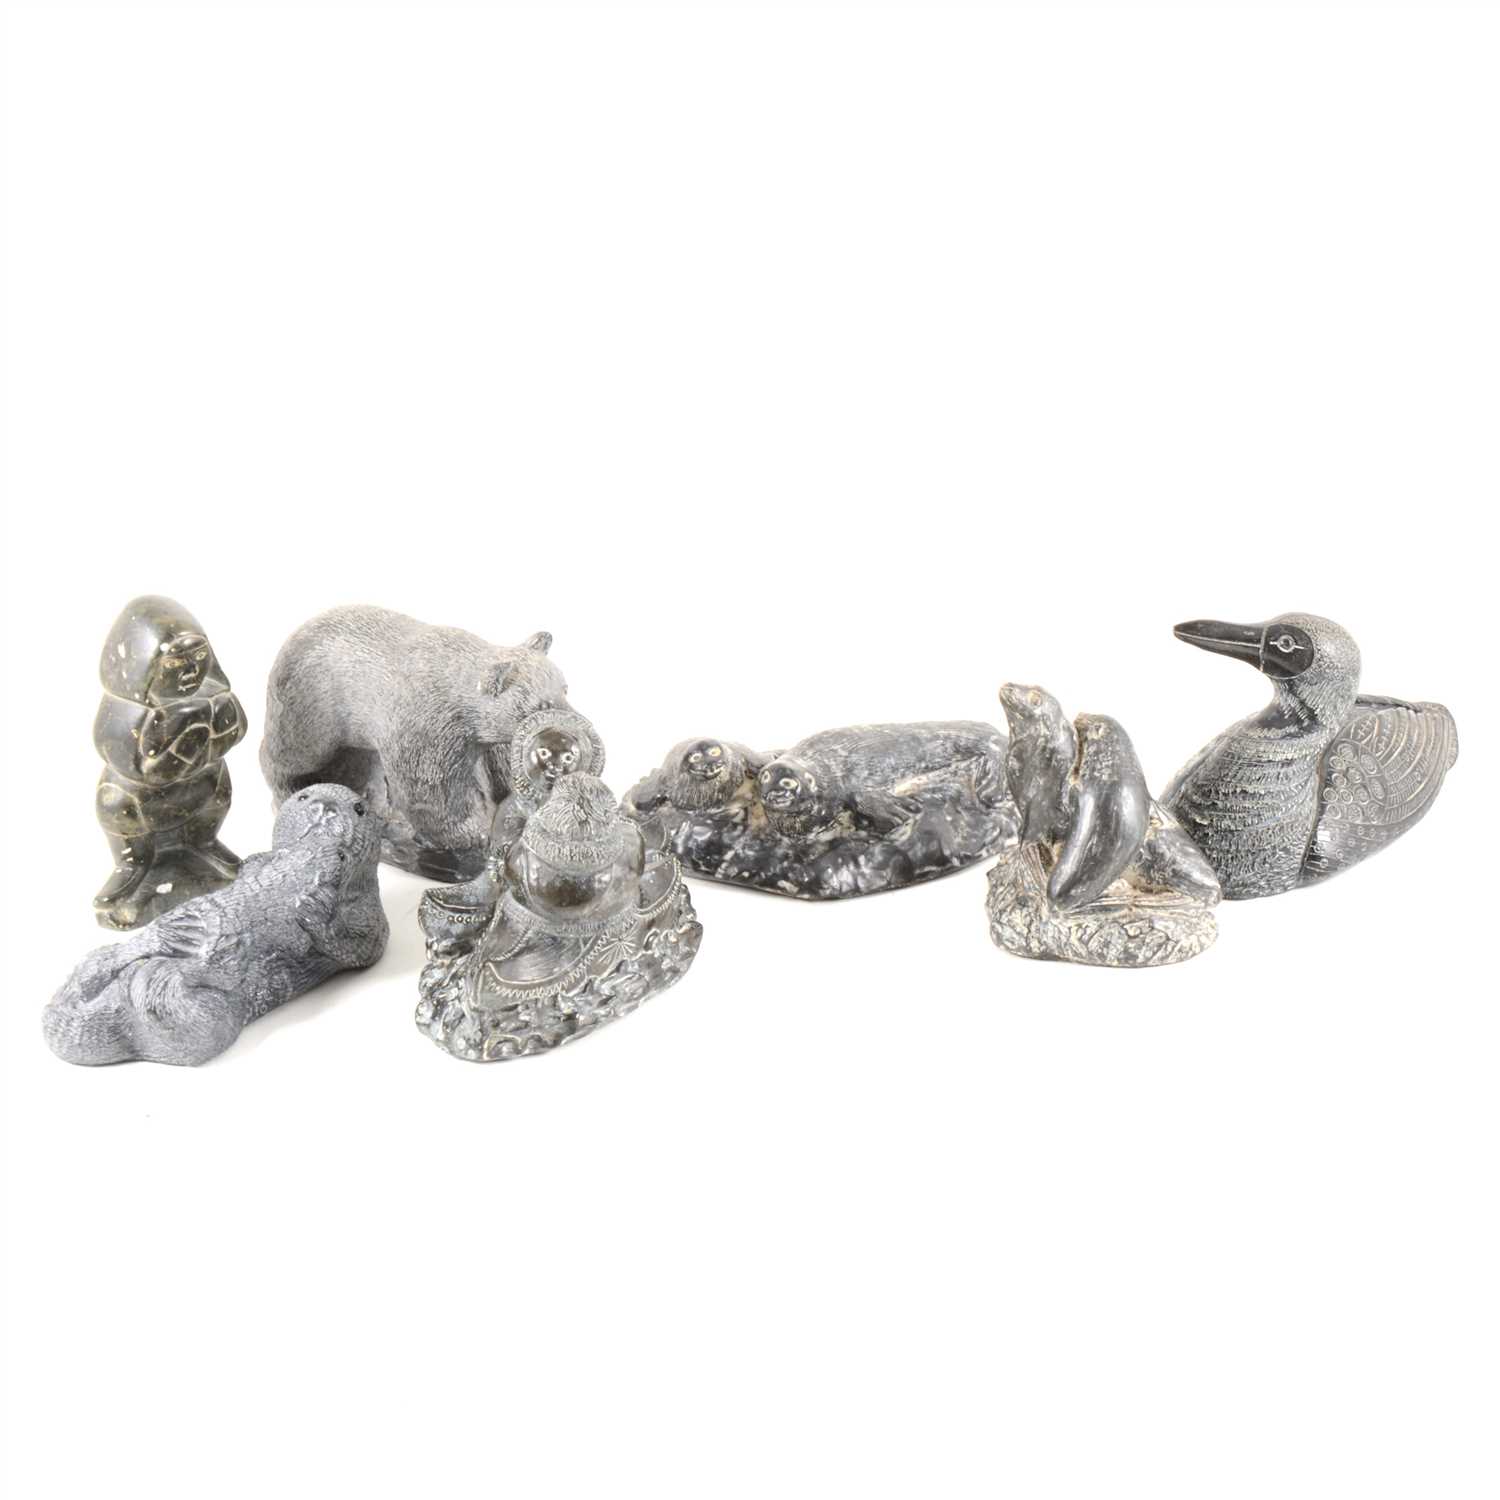 Lot 99 - Thirty Inuit-style carvings and cast resin, one by Levi Smith, others by Wolf and Jonlin, some un-named.